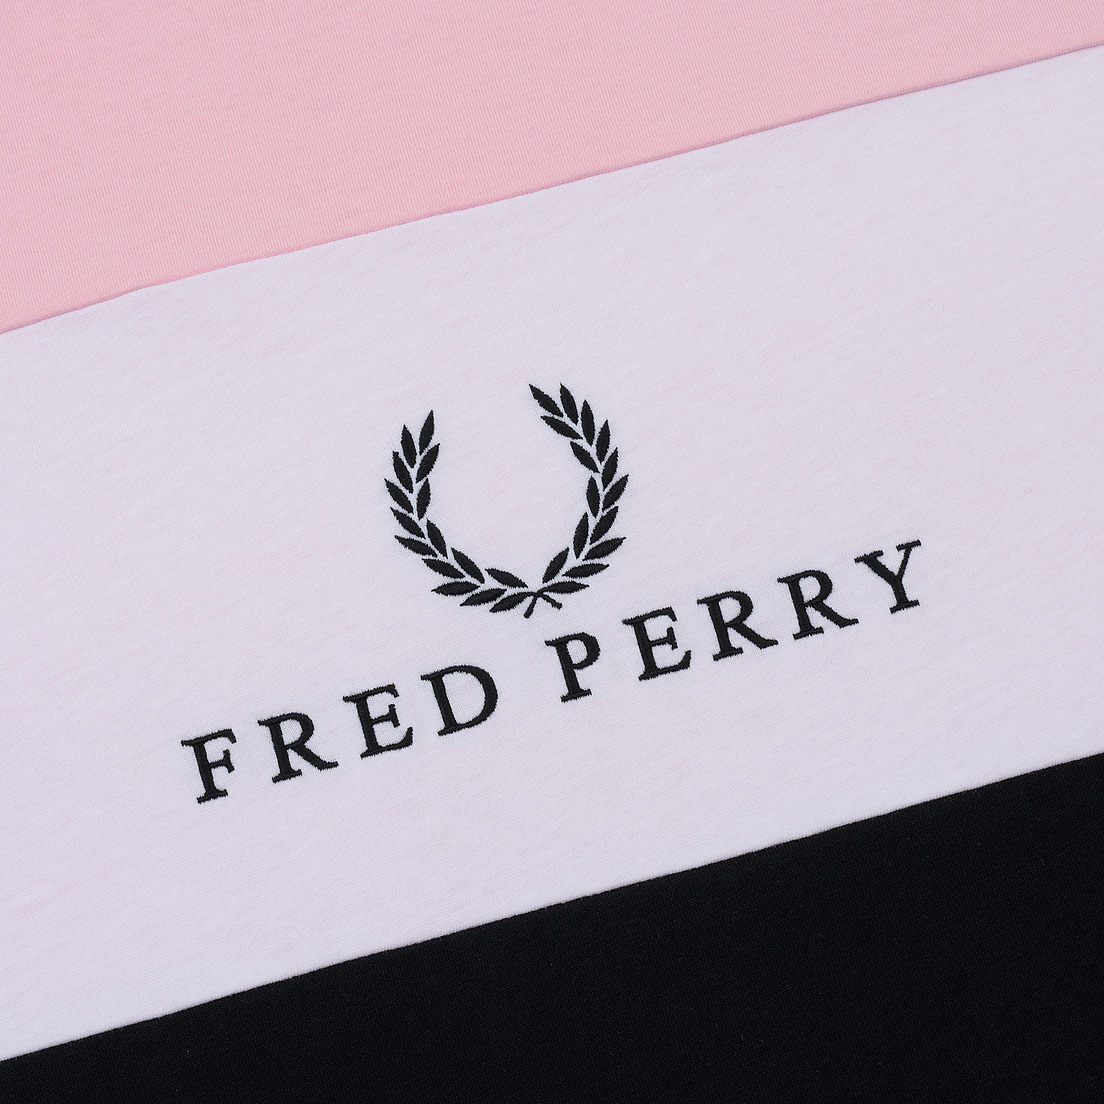 Fred Perry Женская футболка Sports Authentic Embroidered Panel